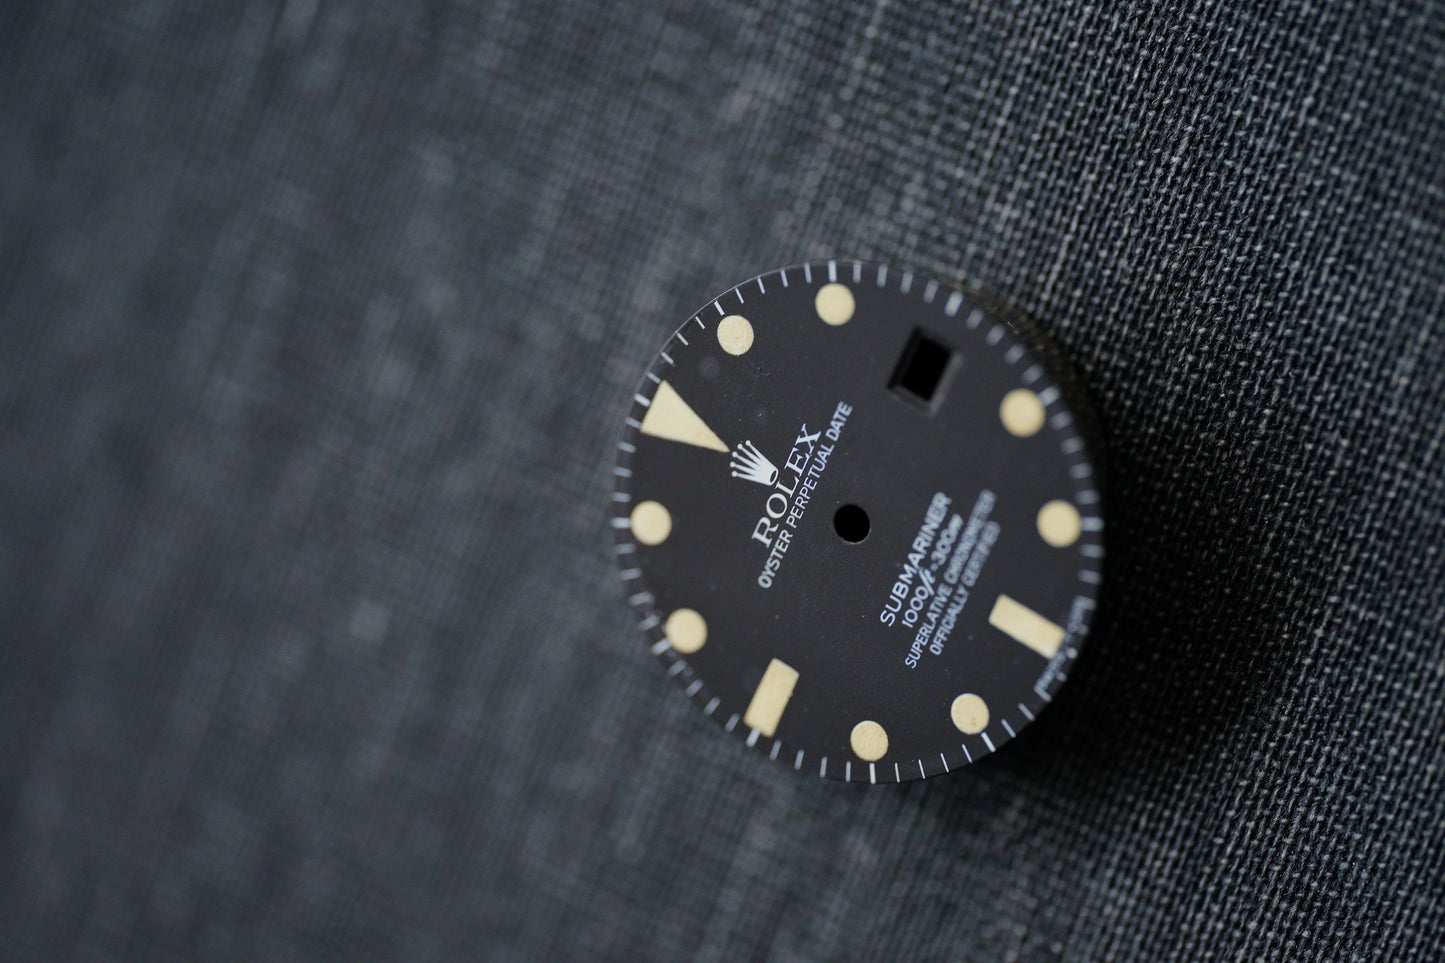 Rolex matte dial for Submariner 16800 with tritium lime